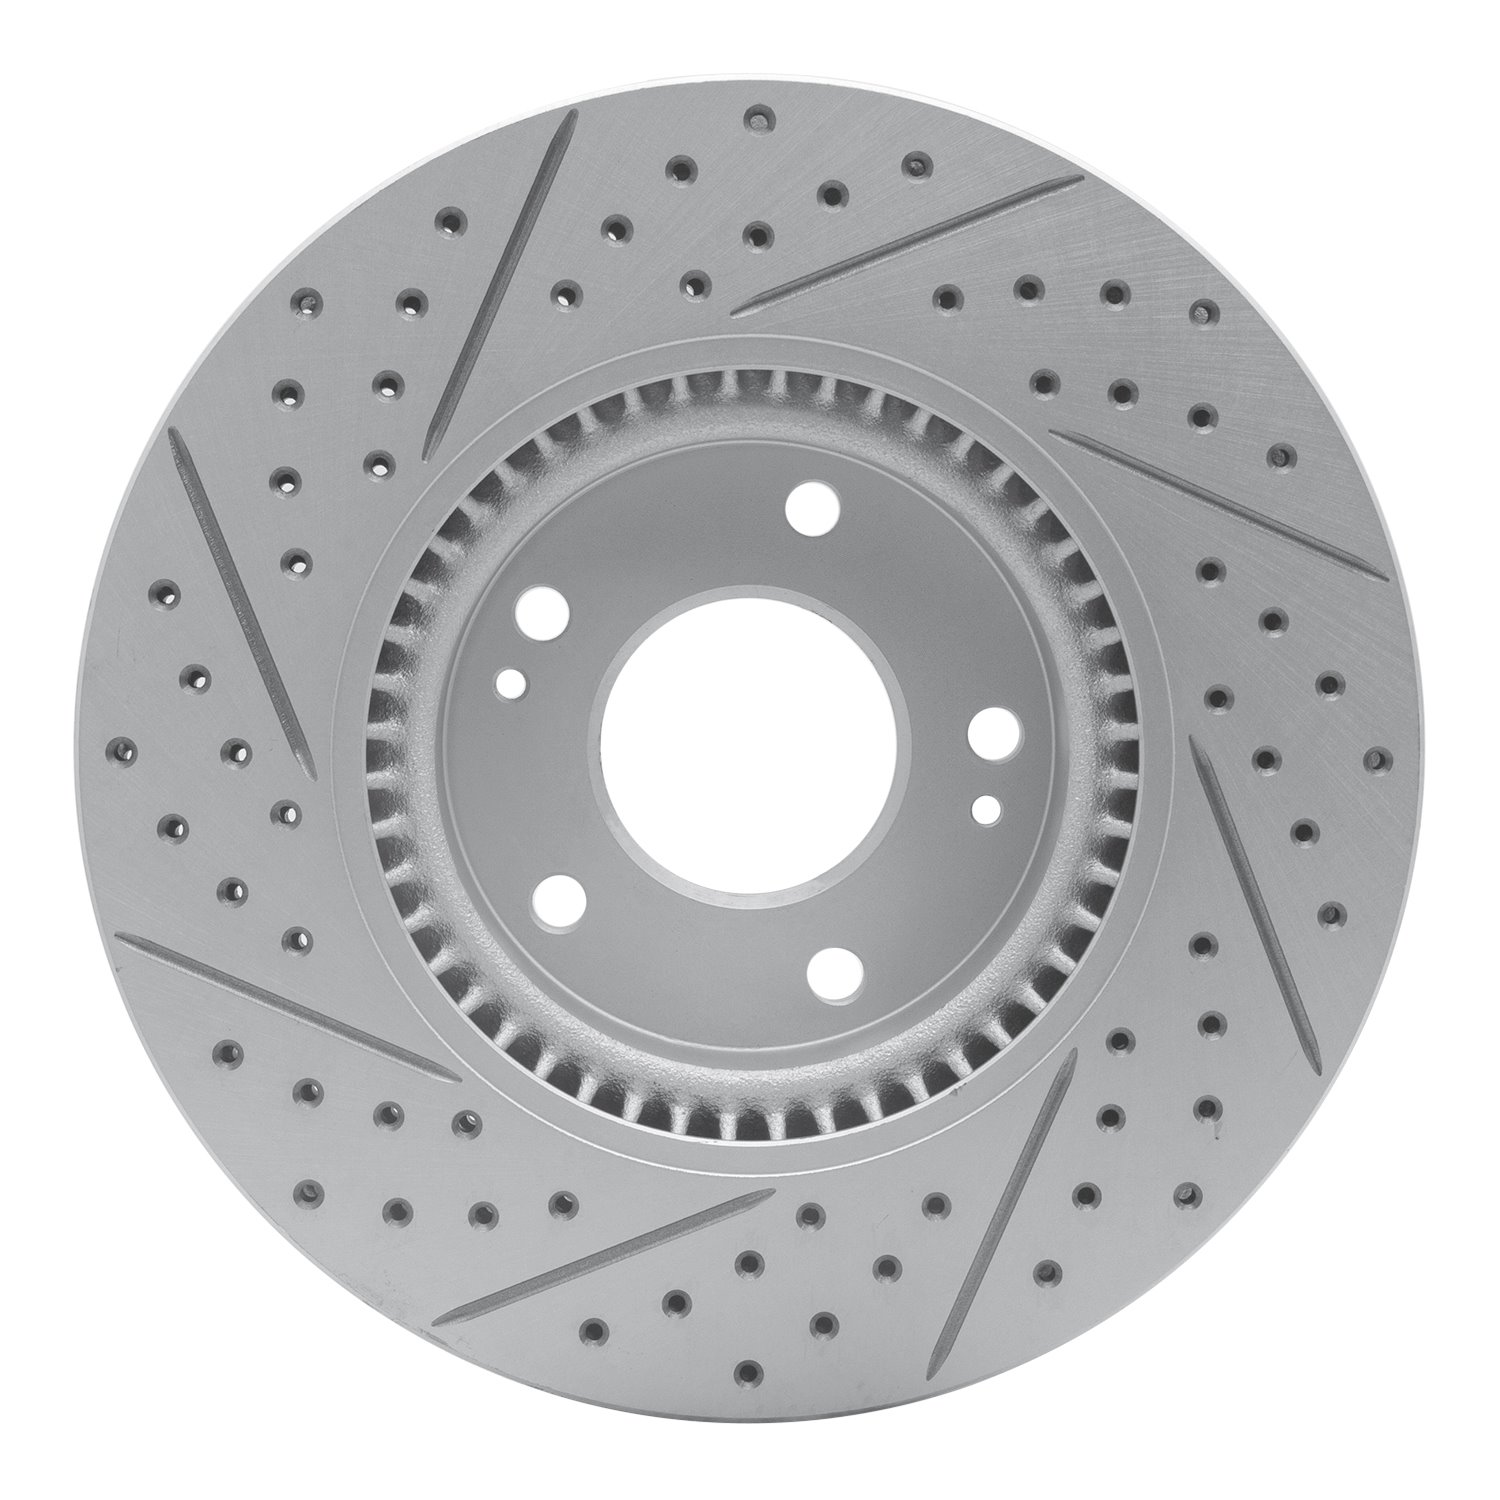 830-03020R Geoperformance Drilled/Slotted Brake Rotor, 2005-2019 Kia/Hyundai/Genesis, Position: Front Right